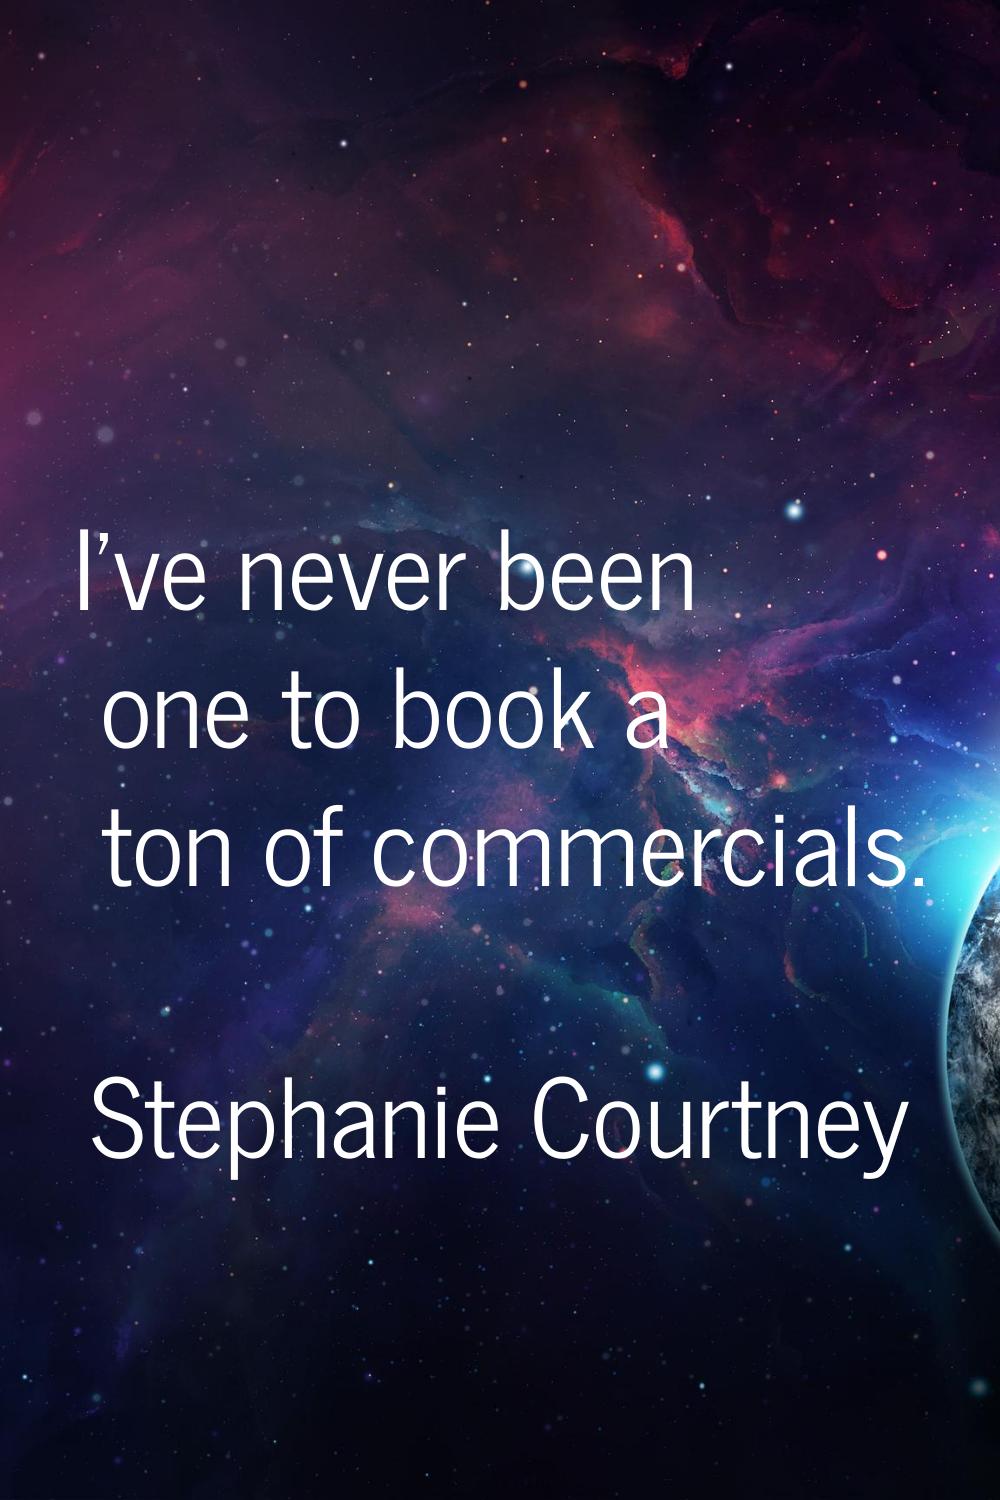 I've never been one to book a ton of commercials.